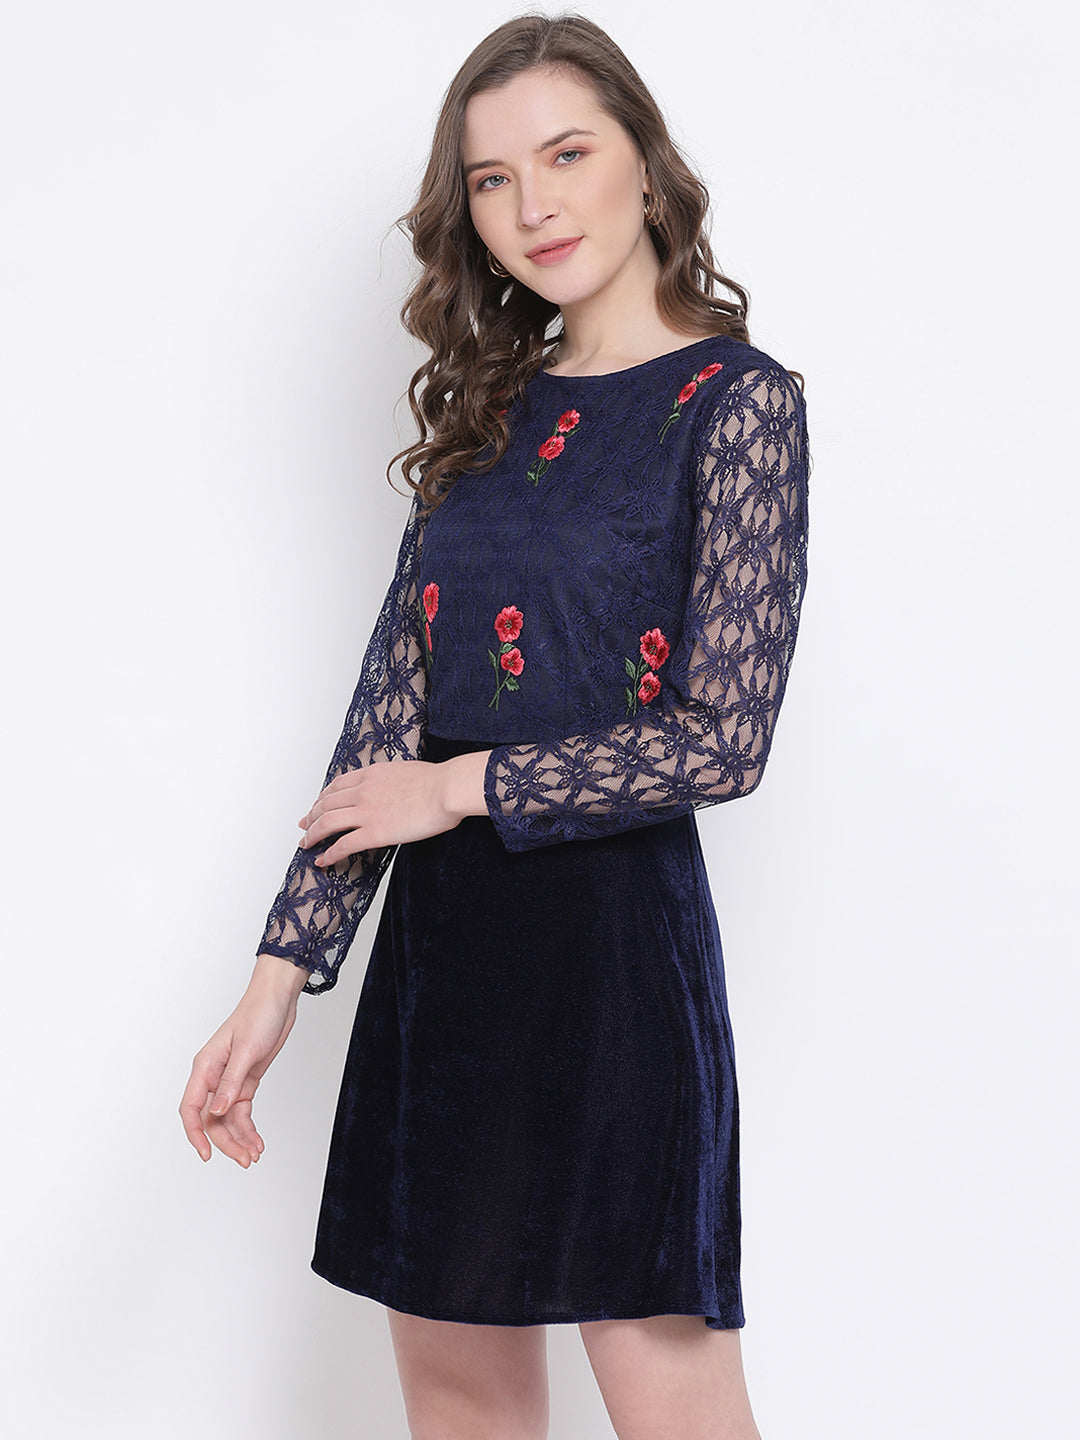 LY2 Polyester Blue Round Neck Long Sleeves A-Line Party Dress For Women